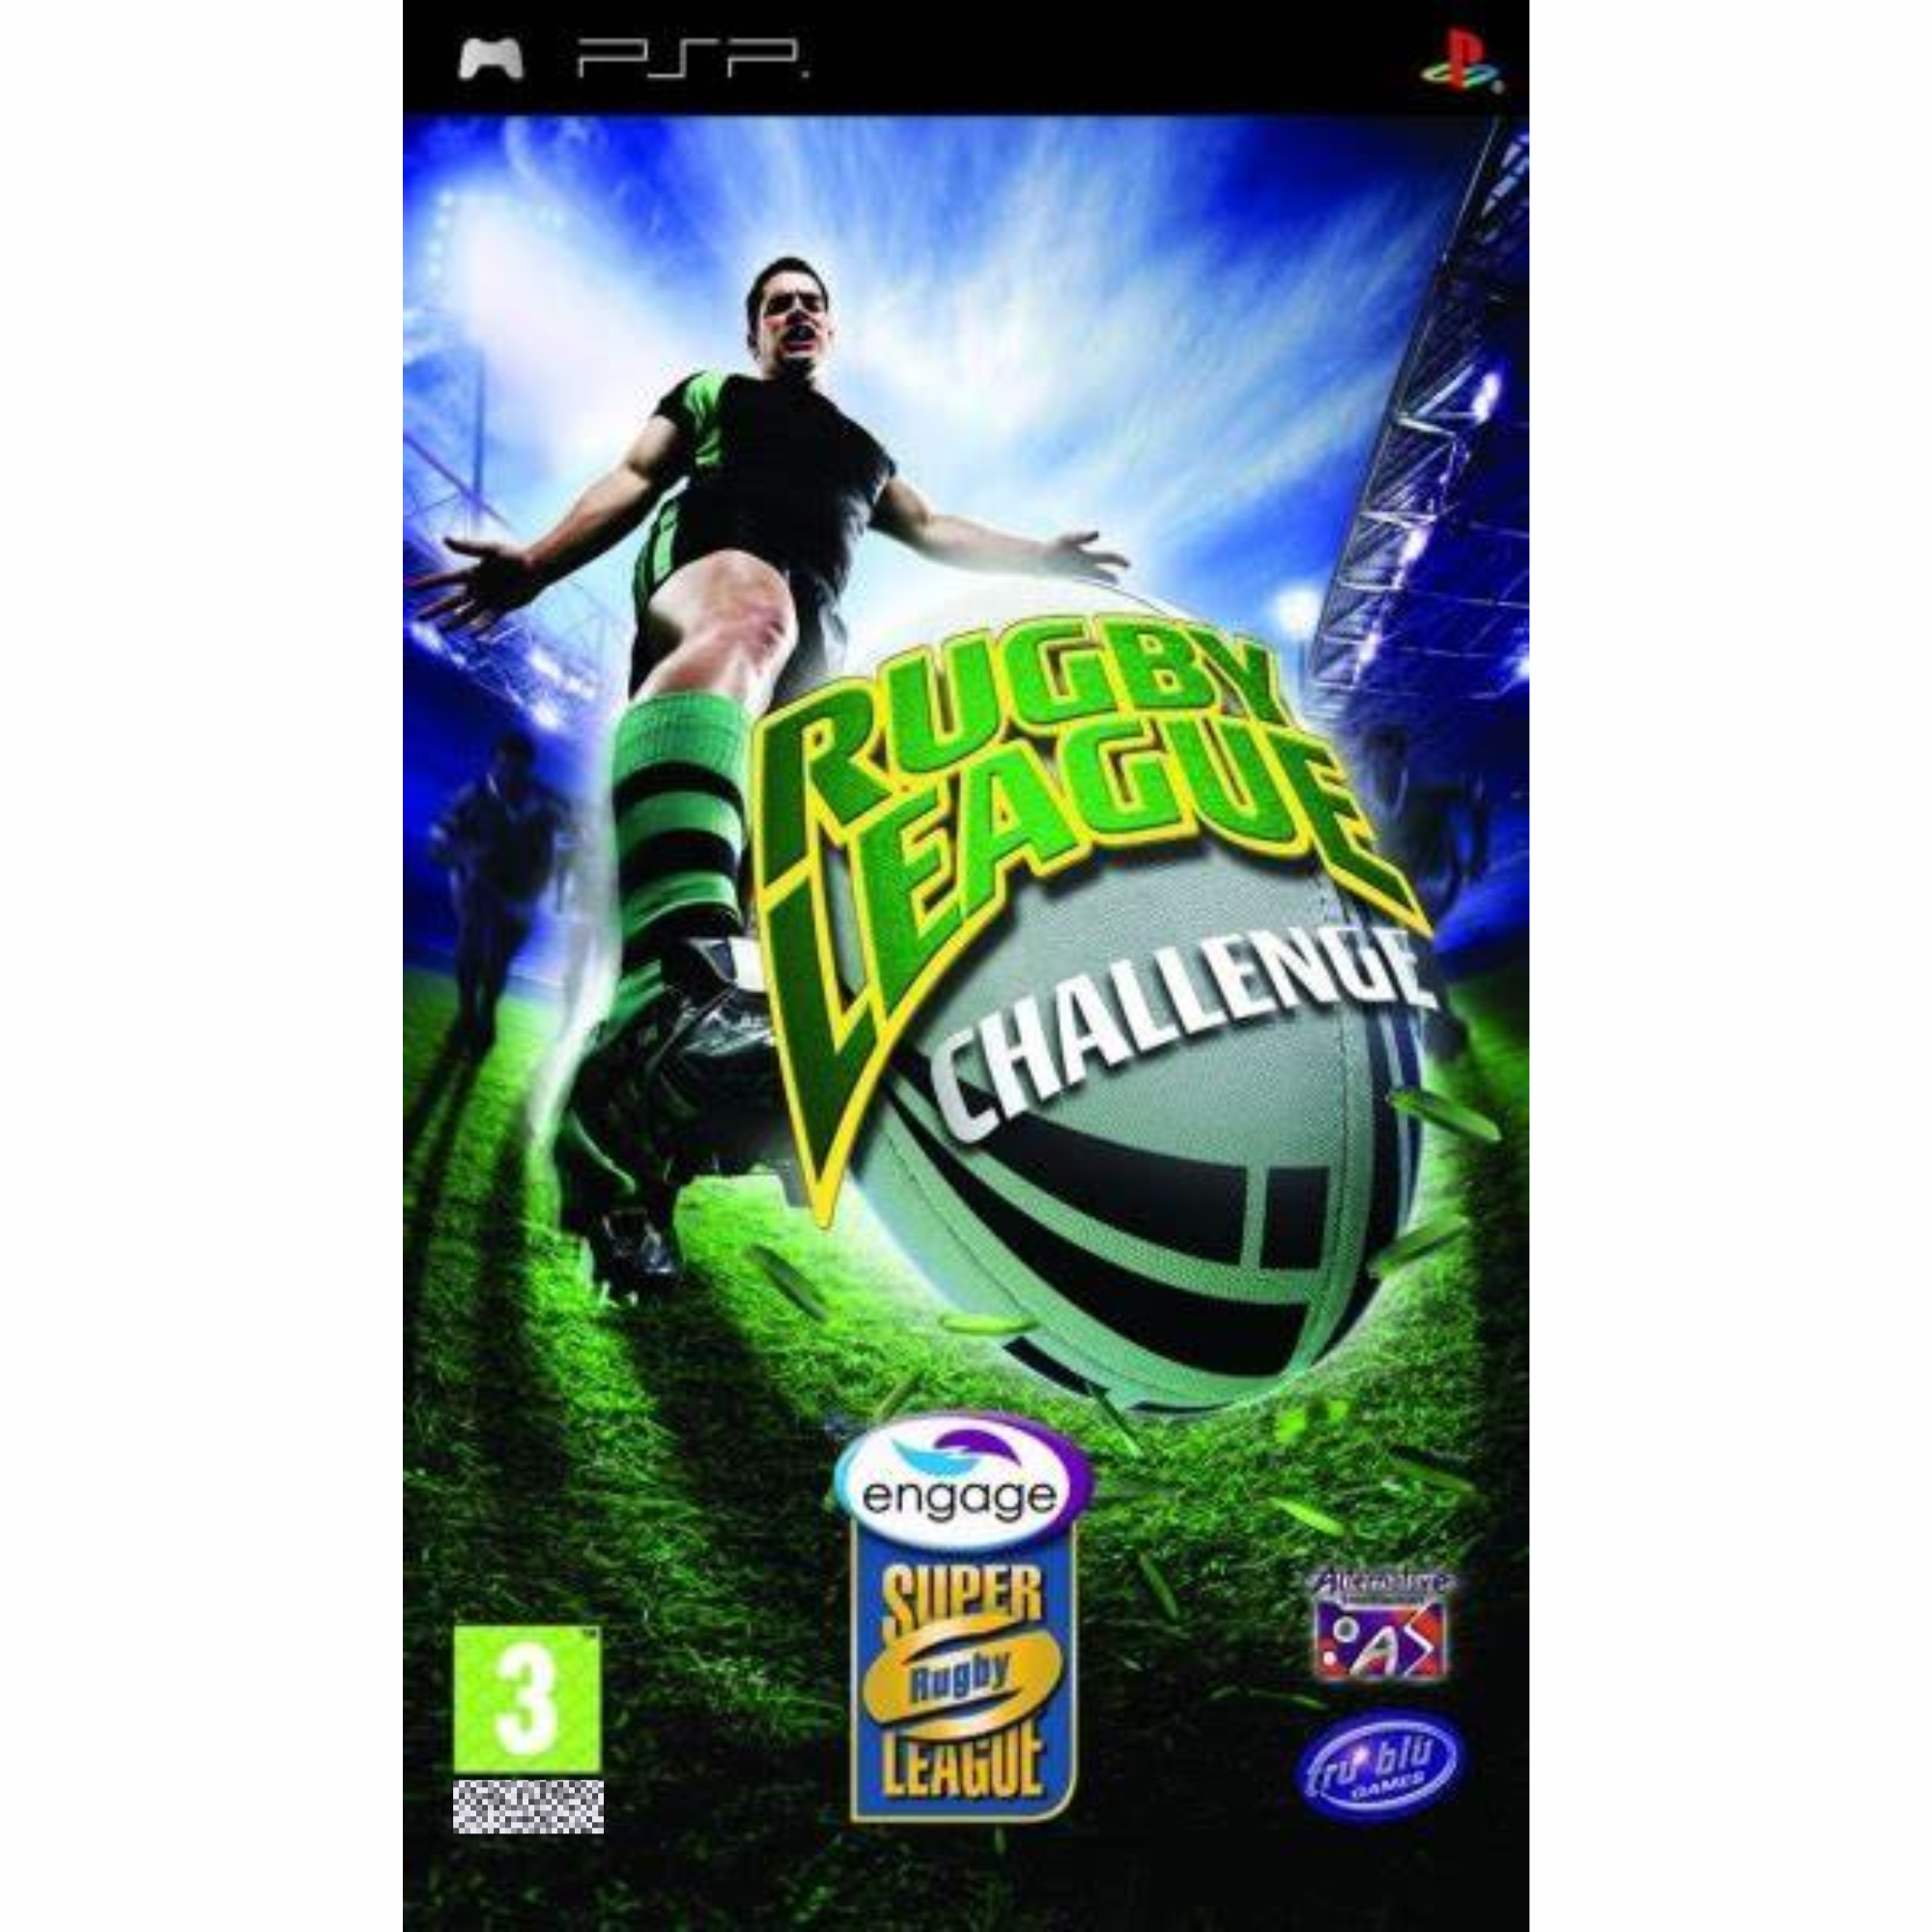 RUGBY LEAGUE CHALLENGE - PSP